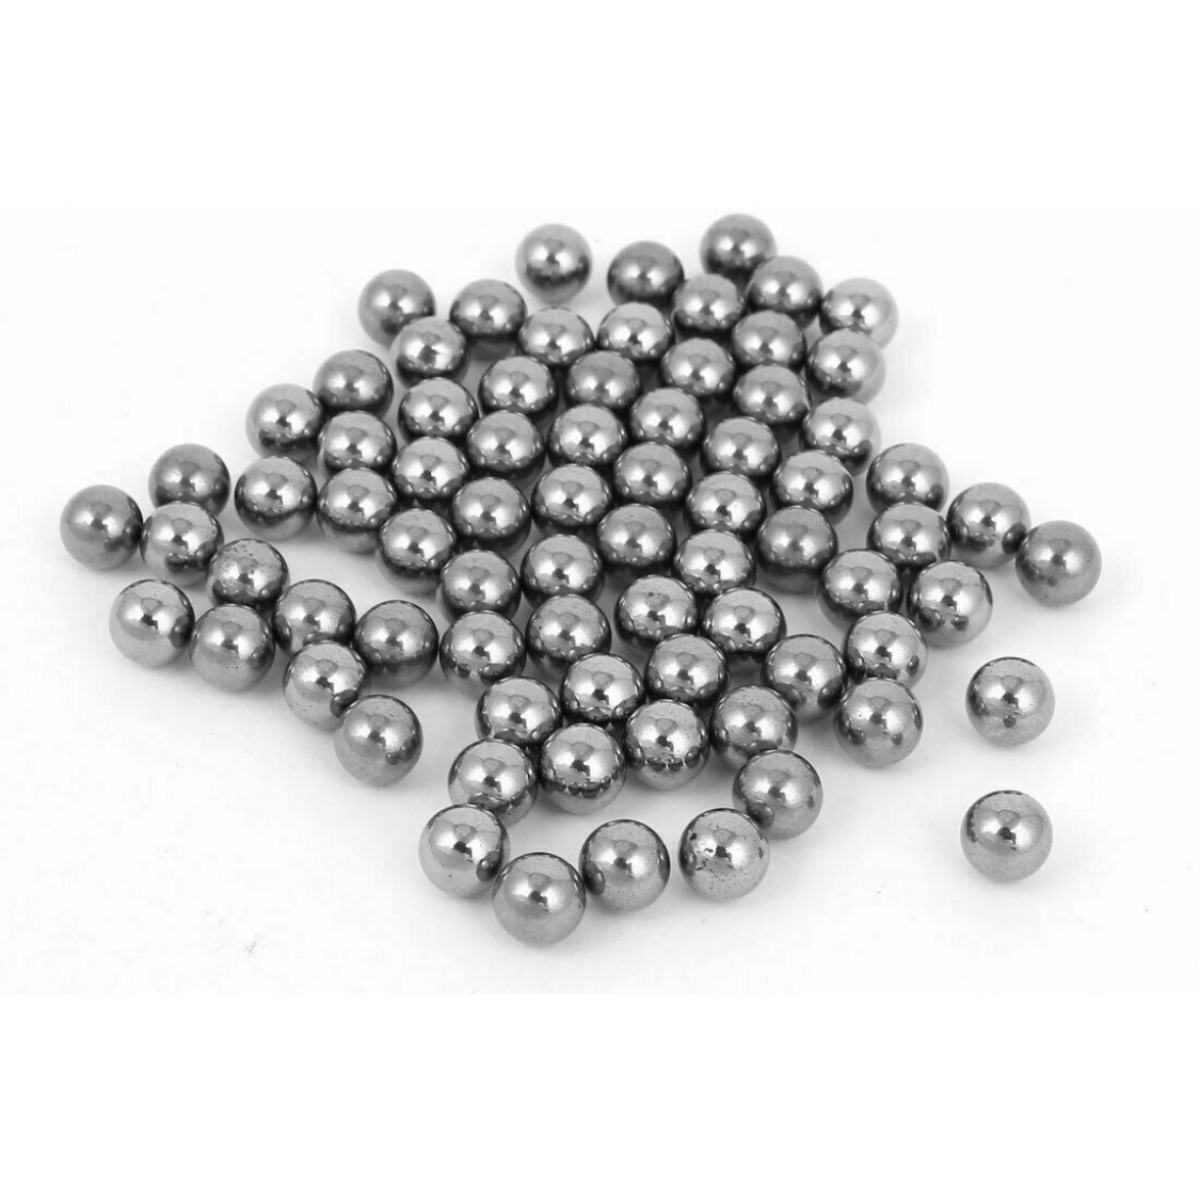 Balines metálicos Cal 6mm/100 pcs – Scorpion Airsoft